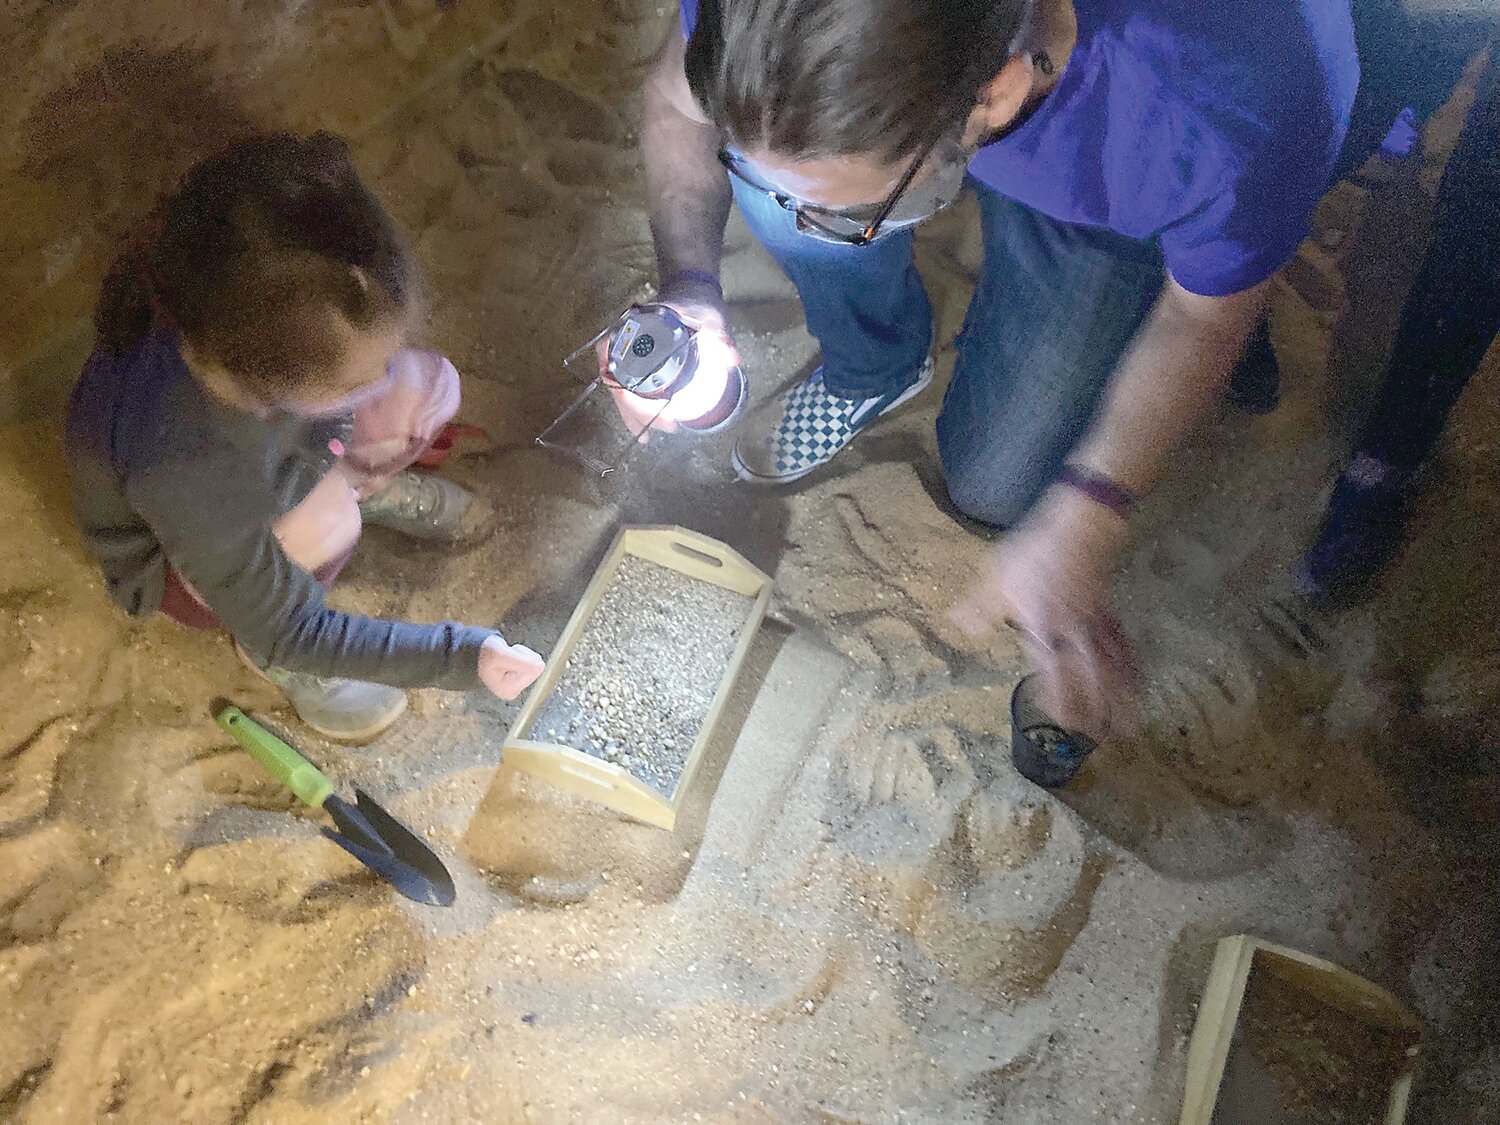 Churchville Nature Center’s Rock and Mineral Expo on April 13 and 14 will feature several hands-on science and geology activities for children.